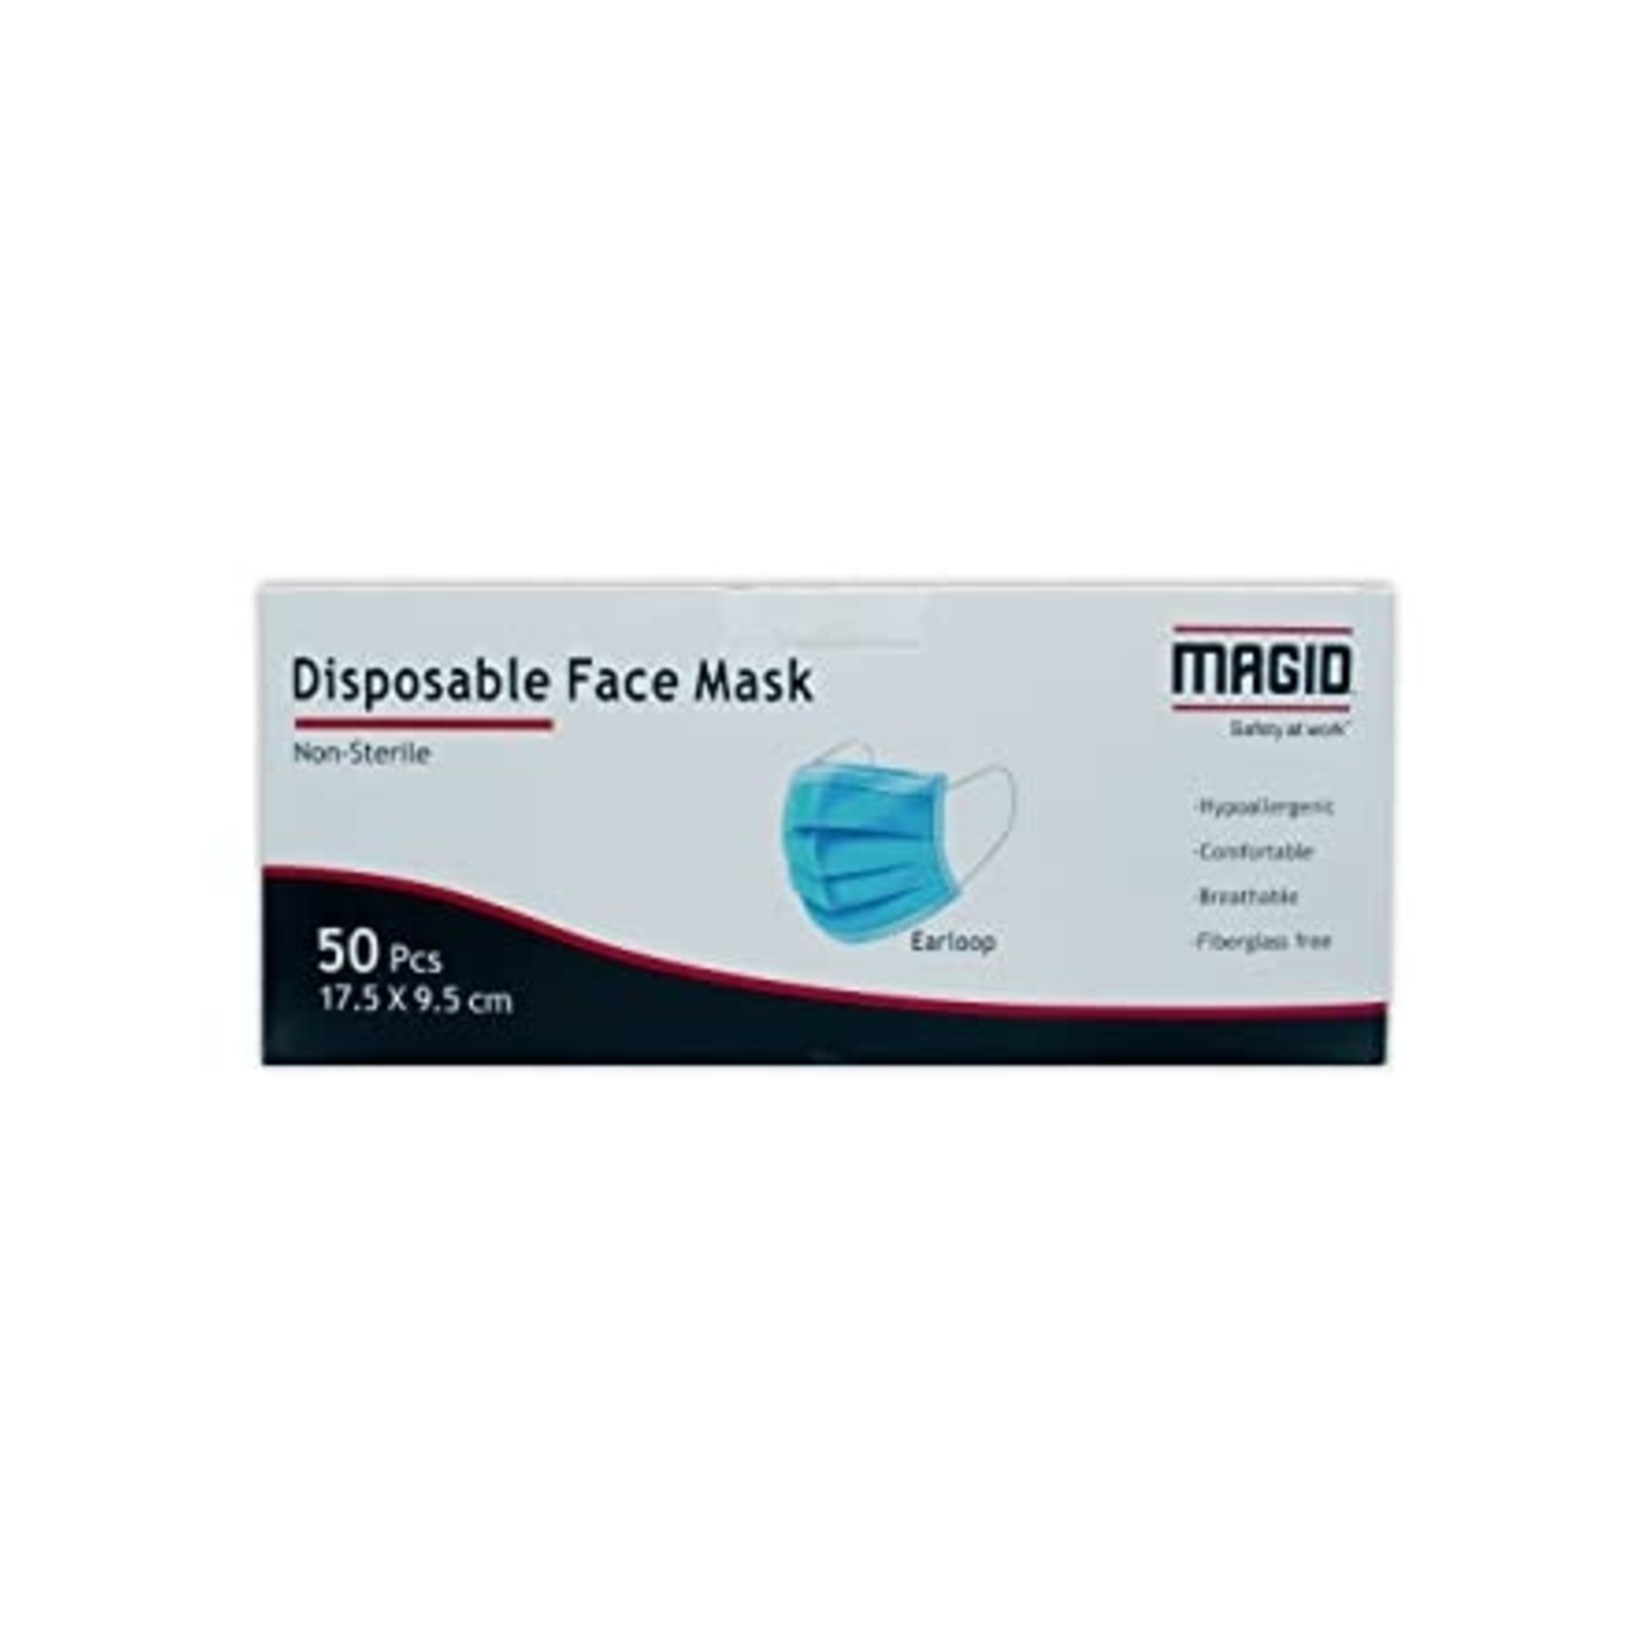 Magid Glove & Safety Disposable 3-ply Mask, 50 Per Box (MM005)